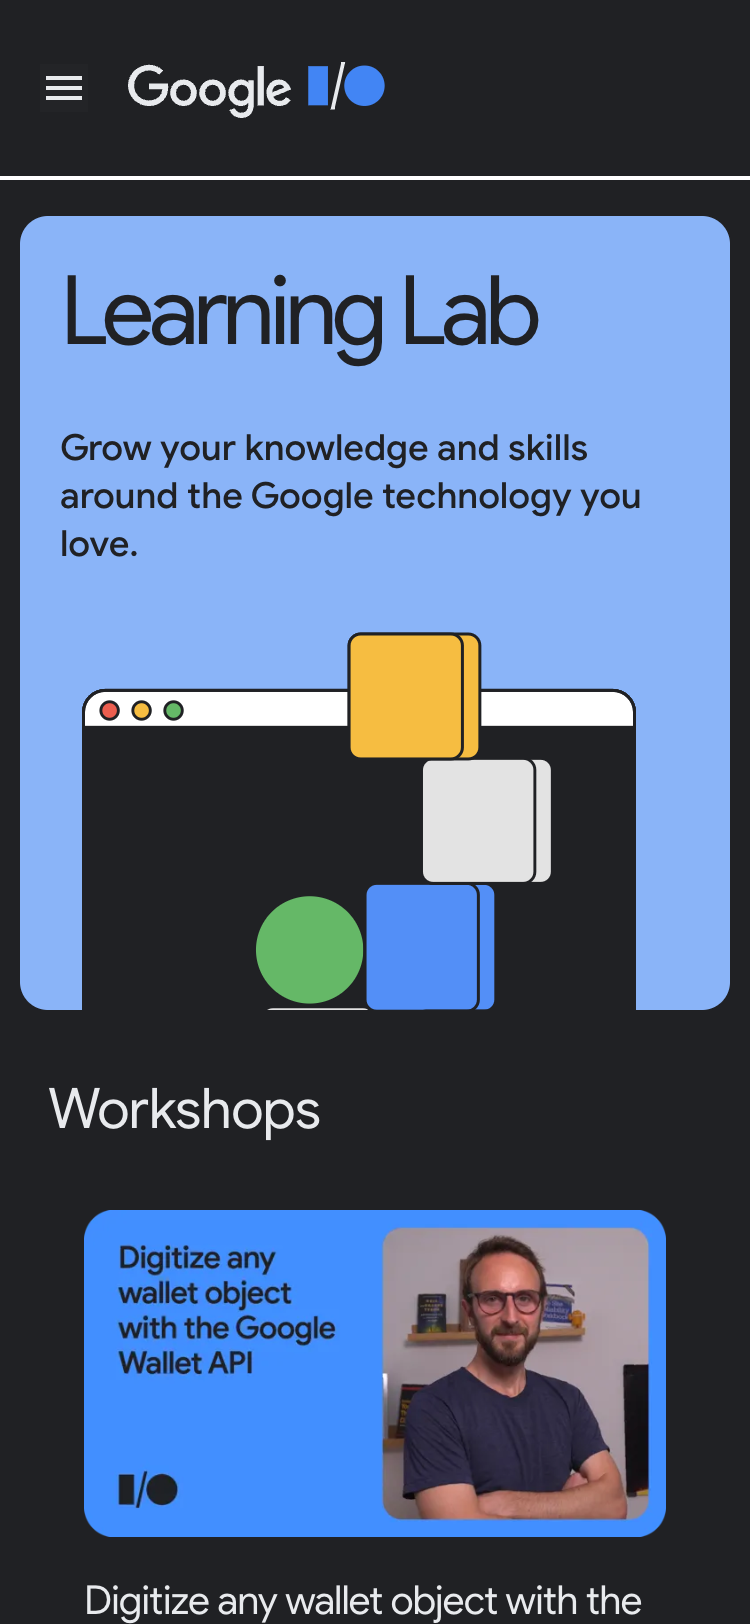 Mobile screenshot of the Google I/O 2022 'Learning Lab' page. The header contains the Google I/O logo and a menu button. The hero contains a short introduction paragraph and an illustration of blocks stacked on top of each other. Below is a 'Workshops' section and the first video thumbnail can just be seen.